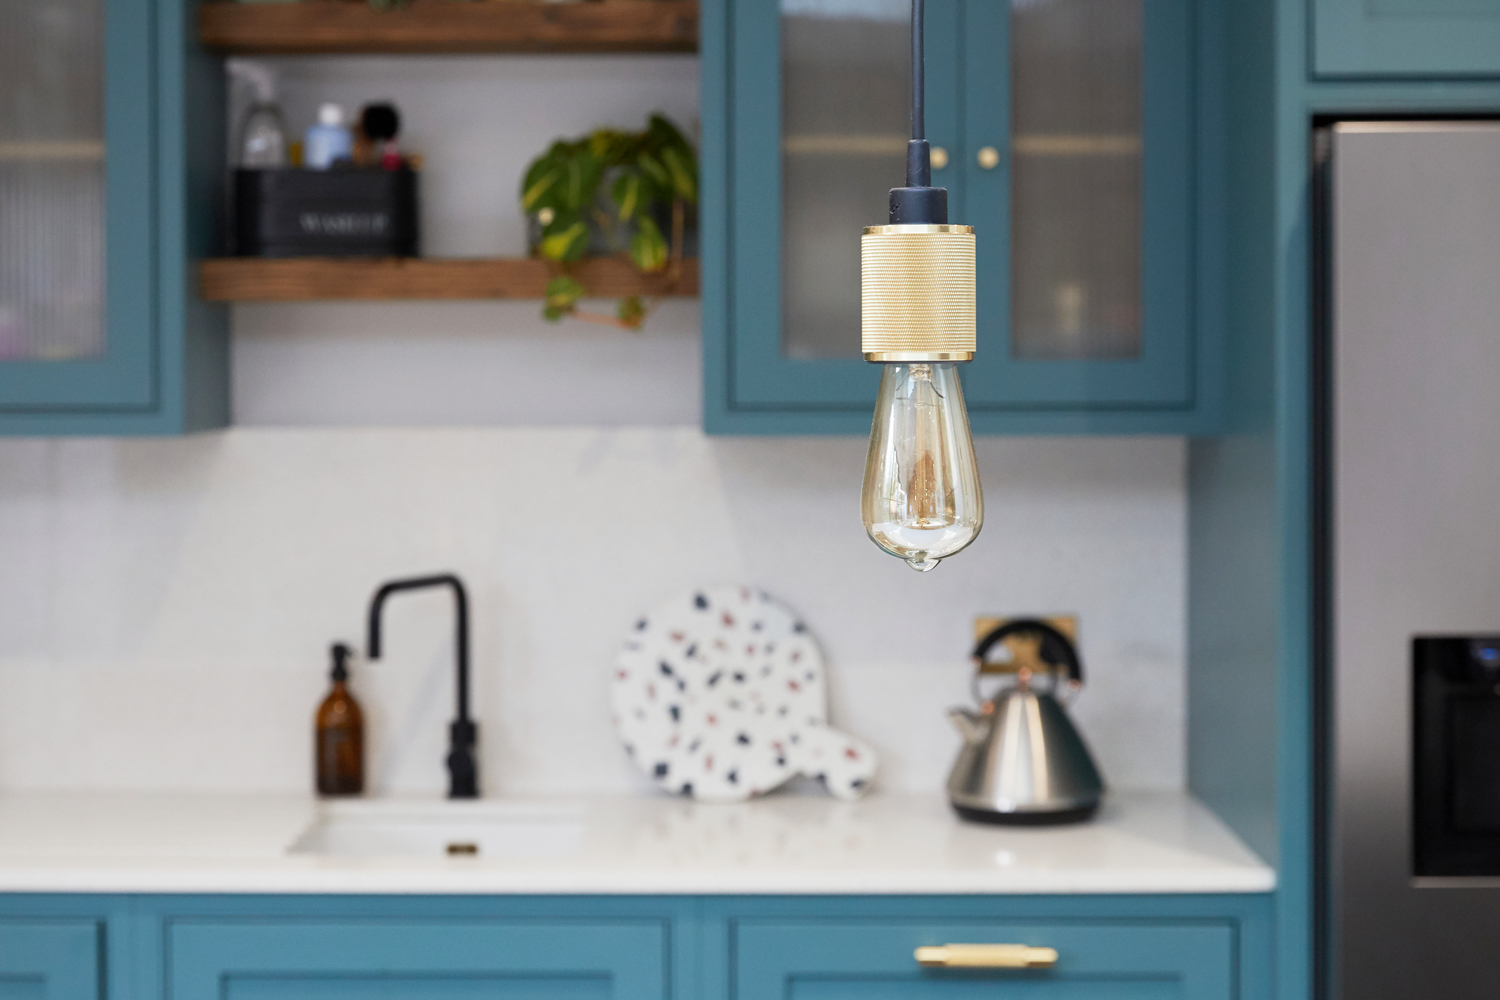 Buster and Punch heavy metal pendant light bulb above bespoke kitchen